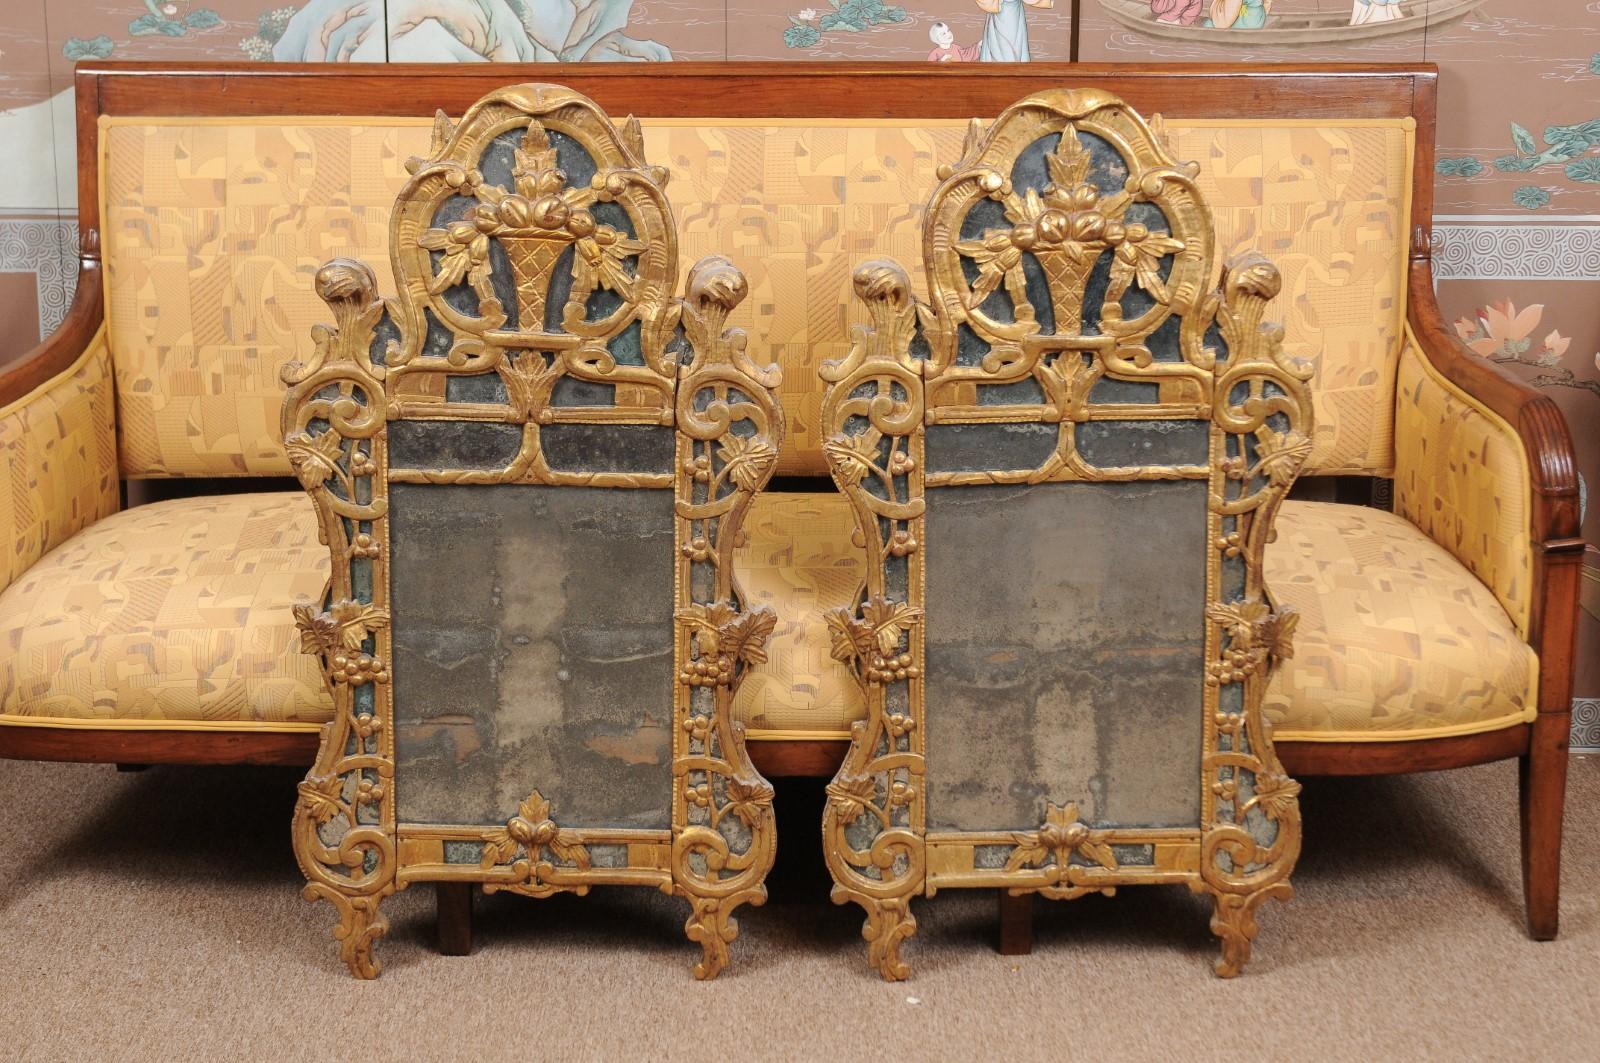 A pair of 19th century French Louis XV style giltwood mirrors featuring carved fruit baskets, grapevines and foliate scrolls mounted to mirror plates. The mirrors with oak back boards.